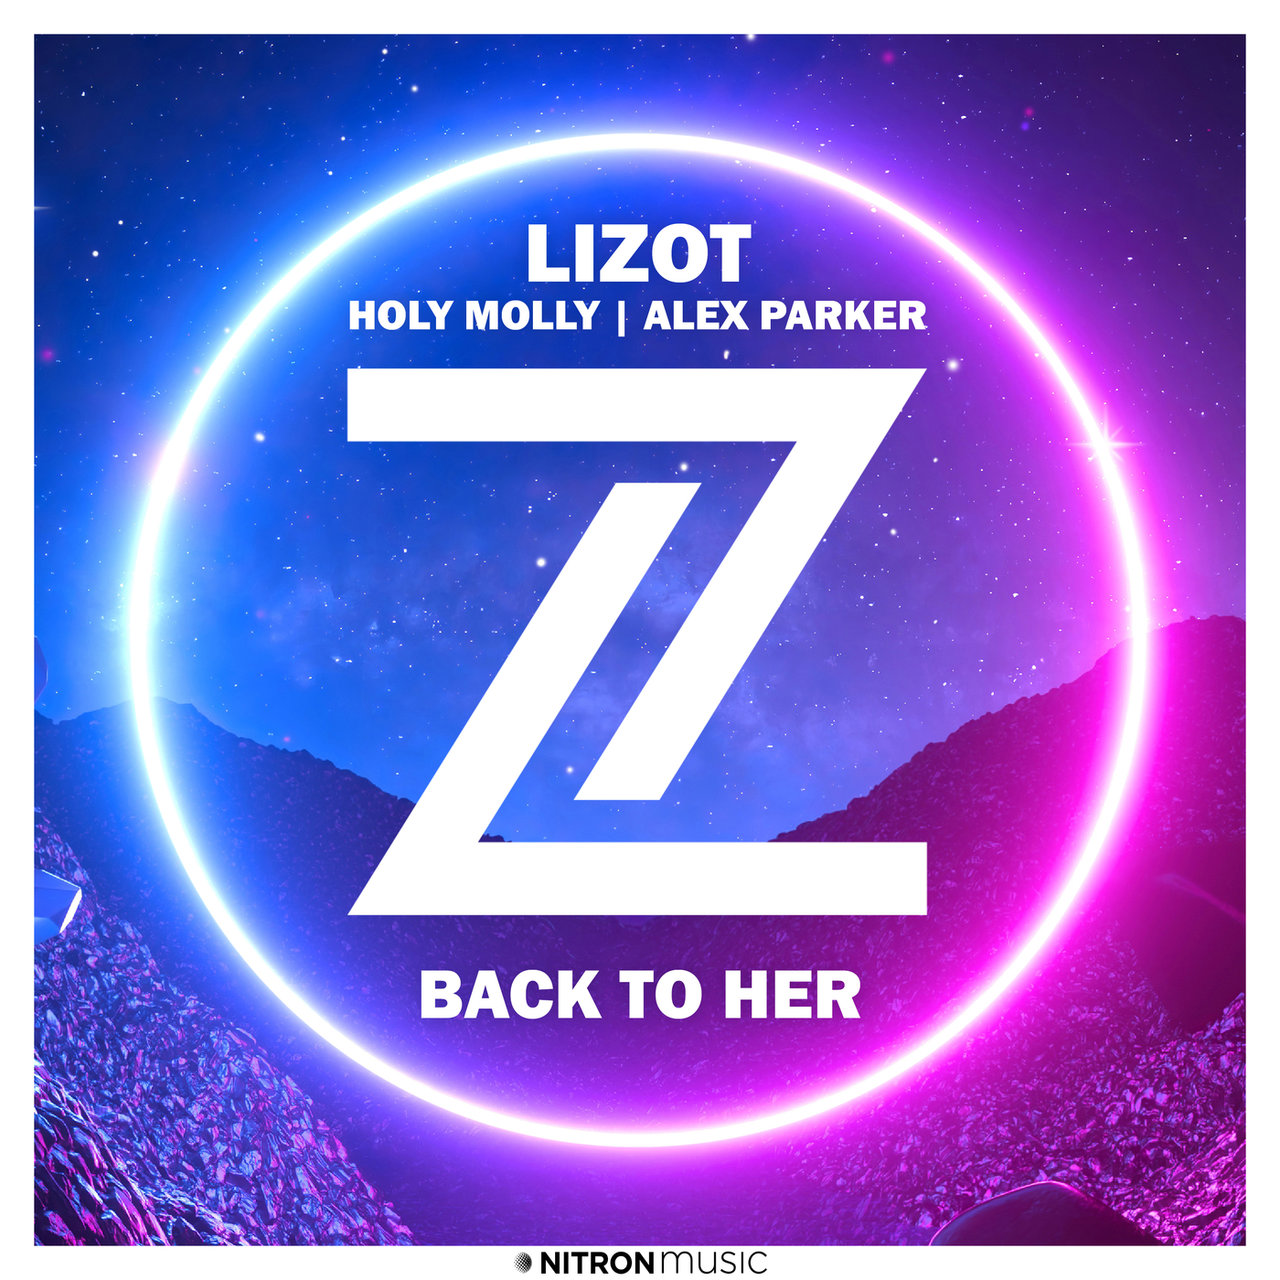 LIZOT, Holy Molly, & Alex Parker Back To Her cover artwork